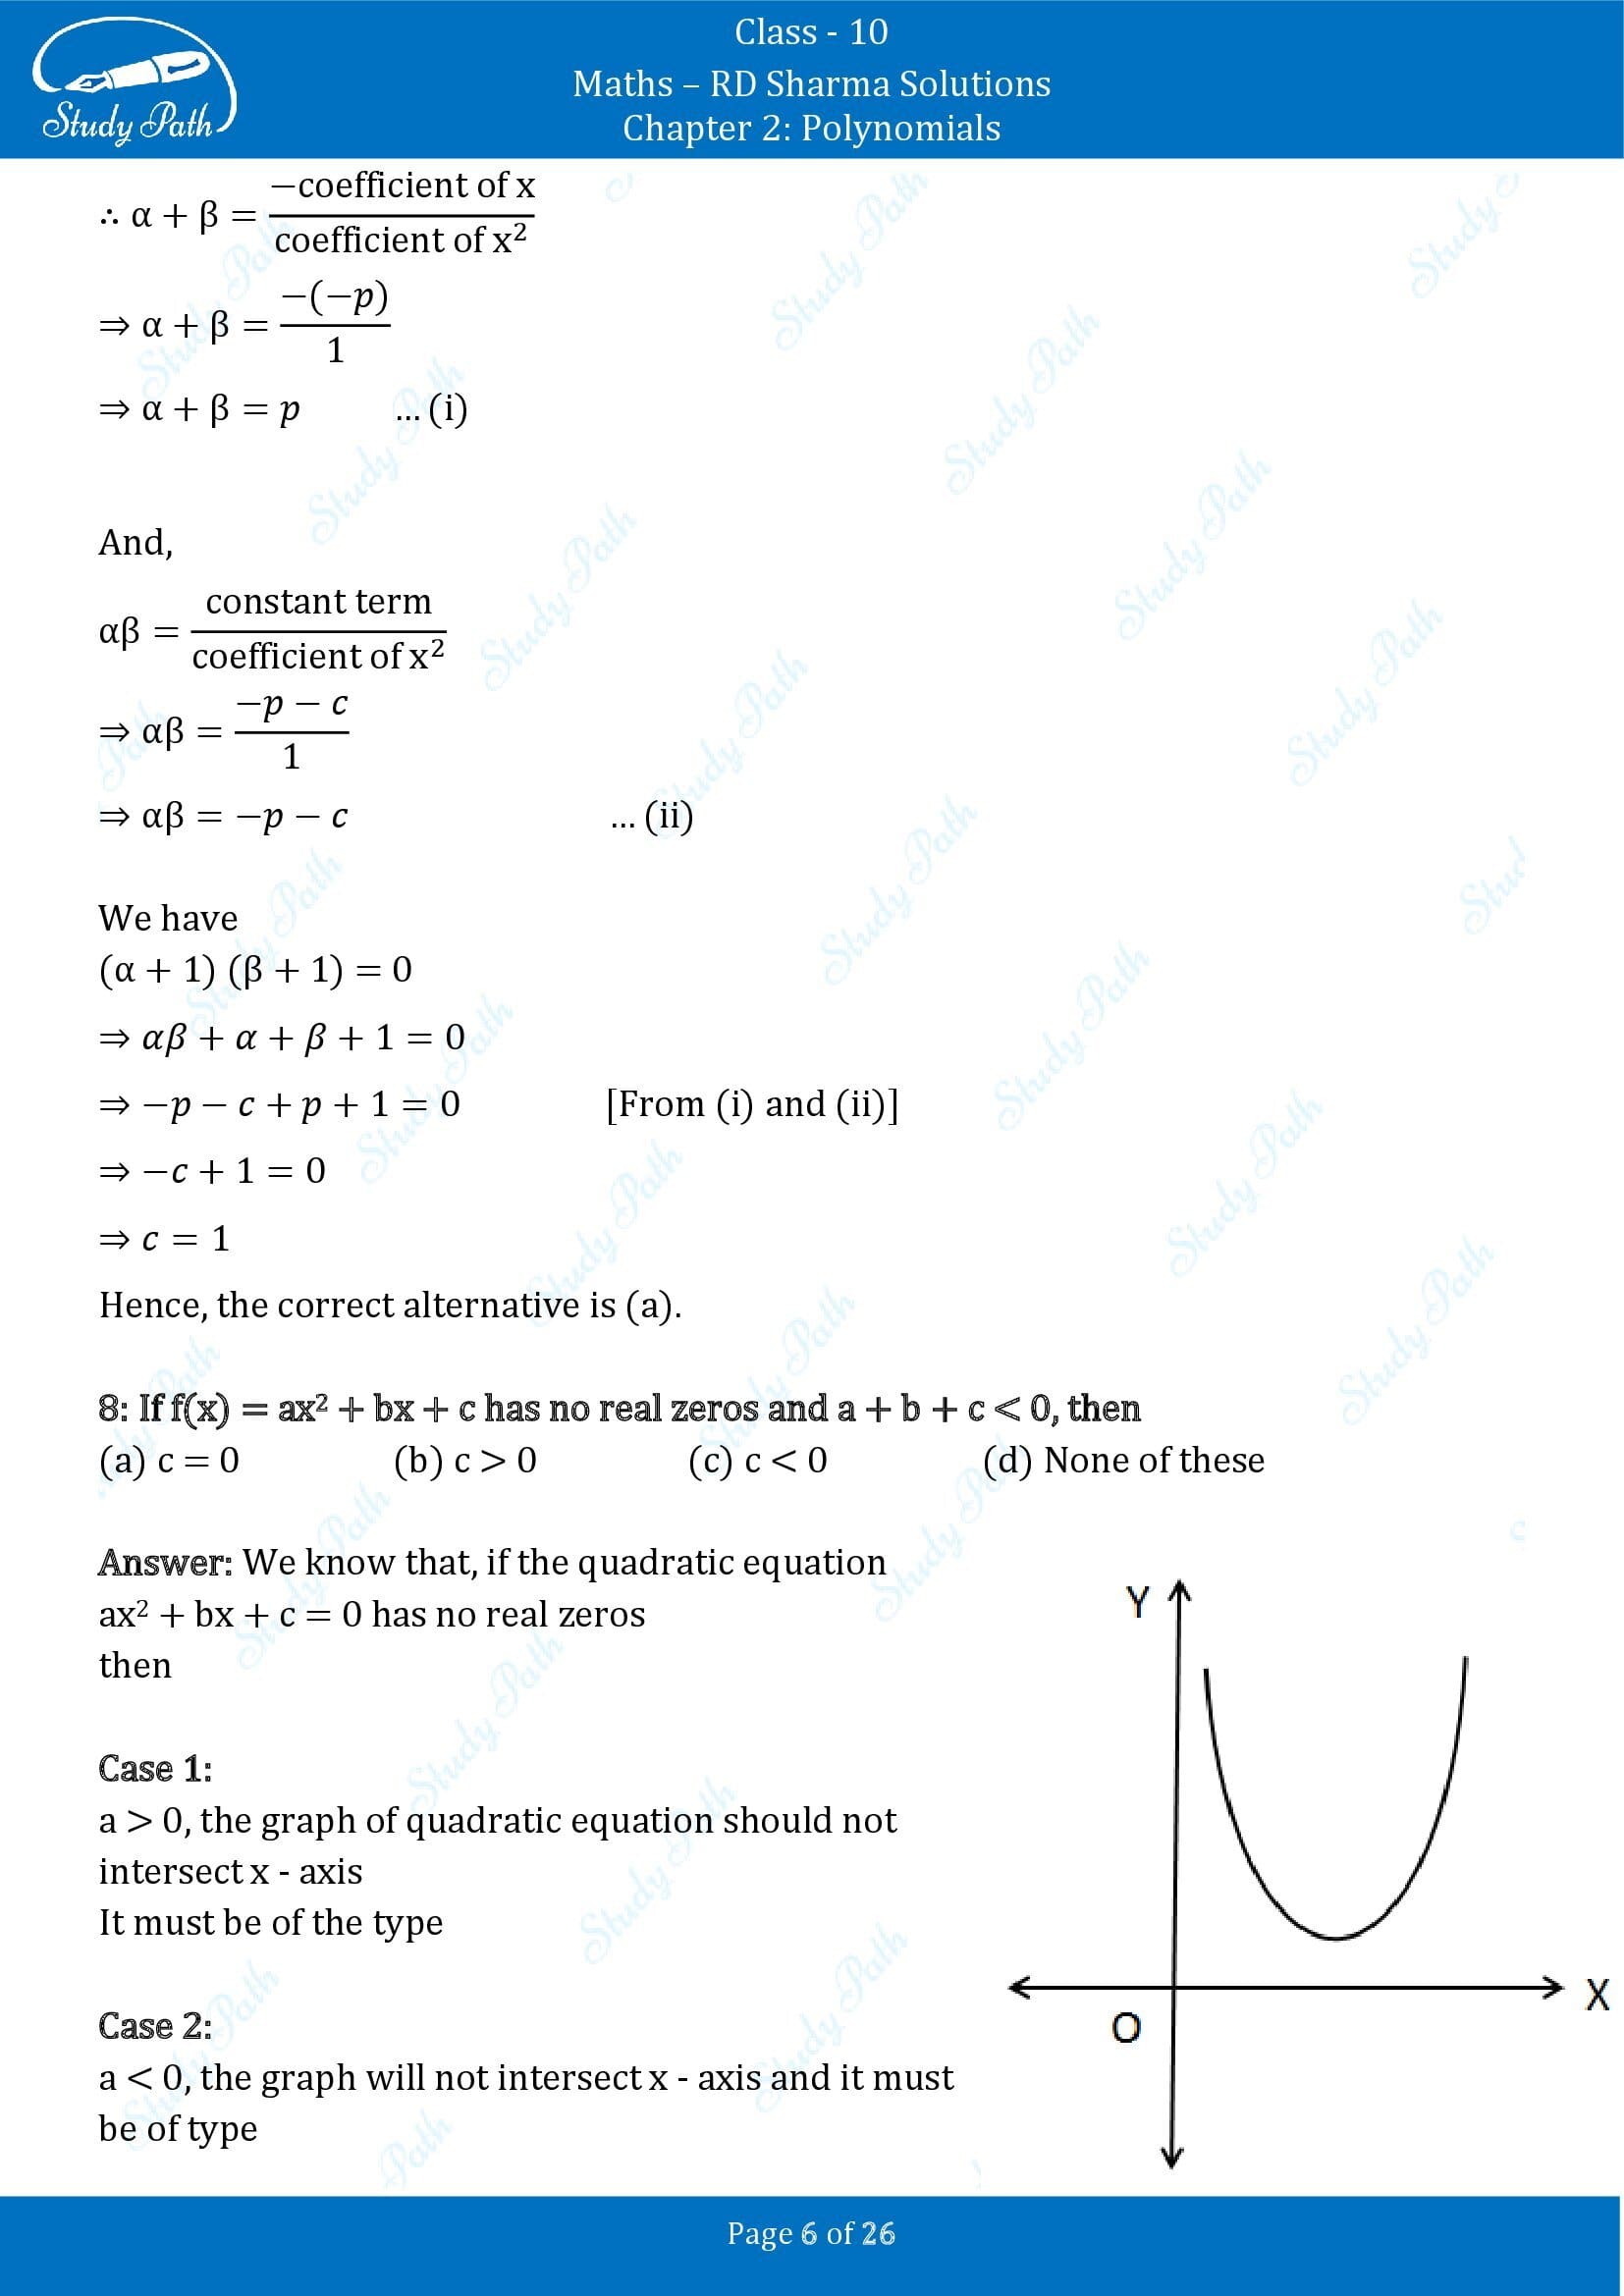 RD Sharma Solutions Class 10 Chapter 2 Polynomials Multiple Choice Questions MCQs 00006